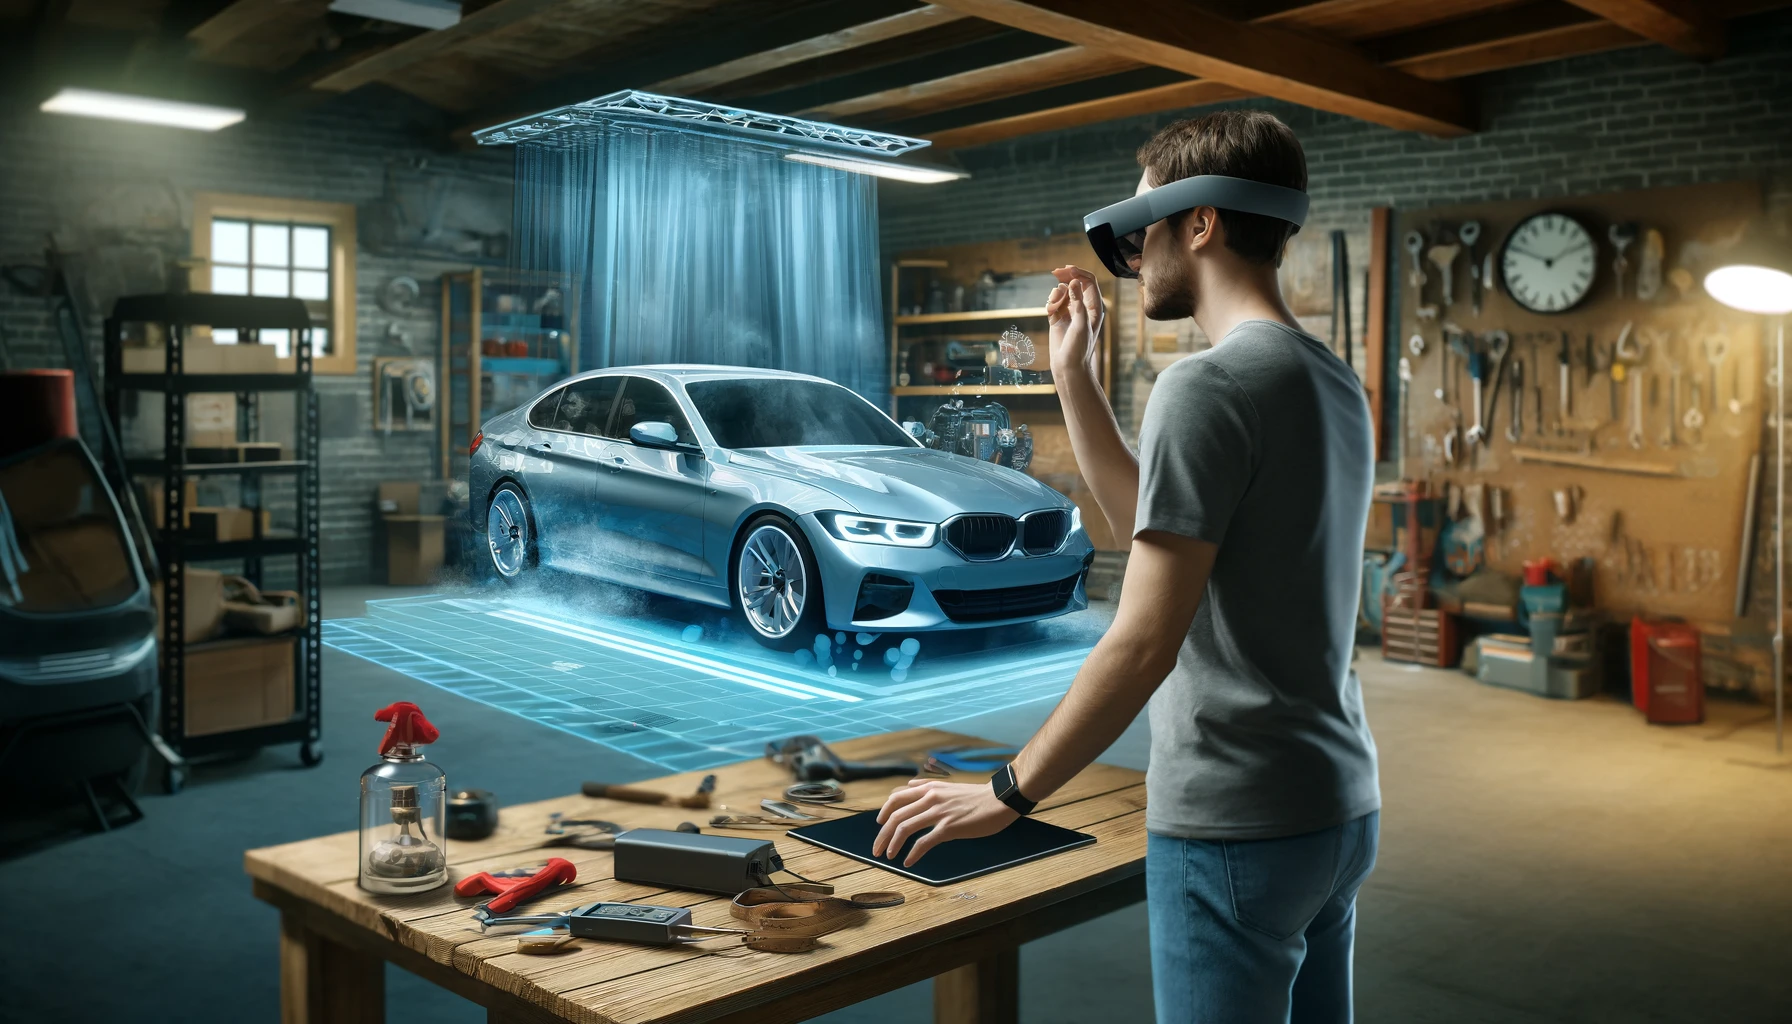 A user experiencing a product virtually through extended reality glasses, visualizing a new car in his own garage.